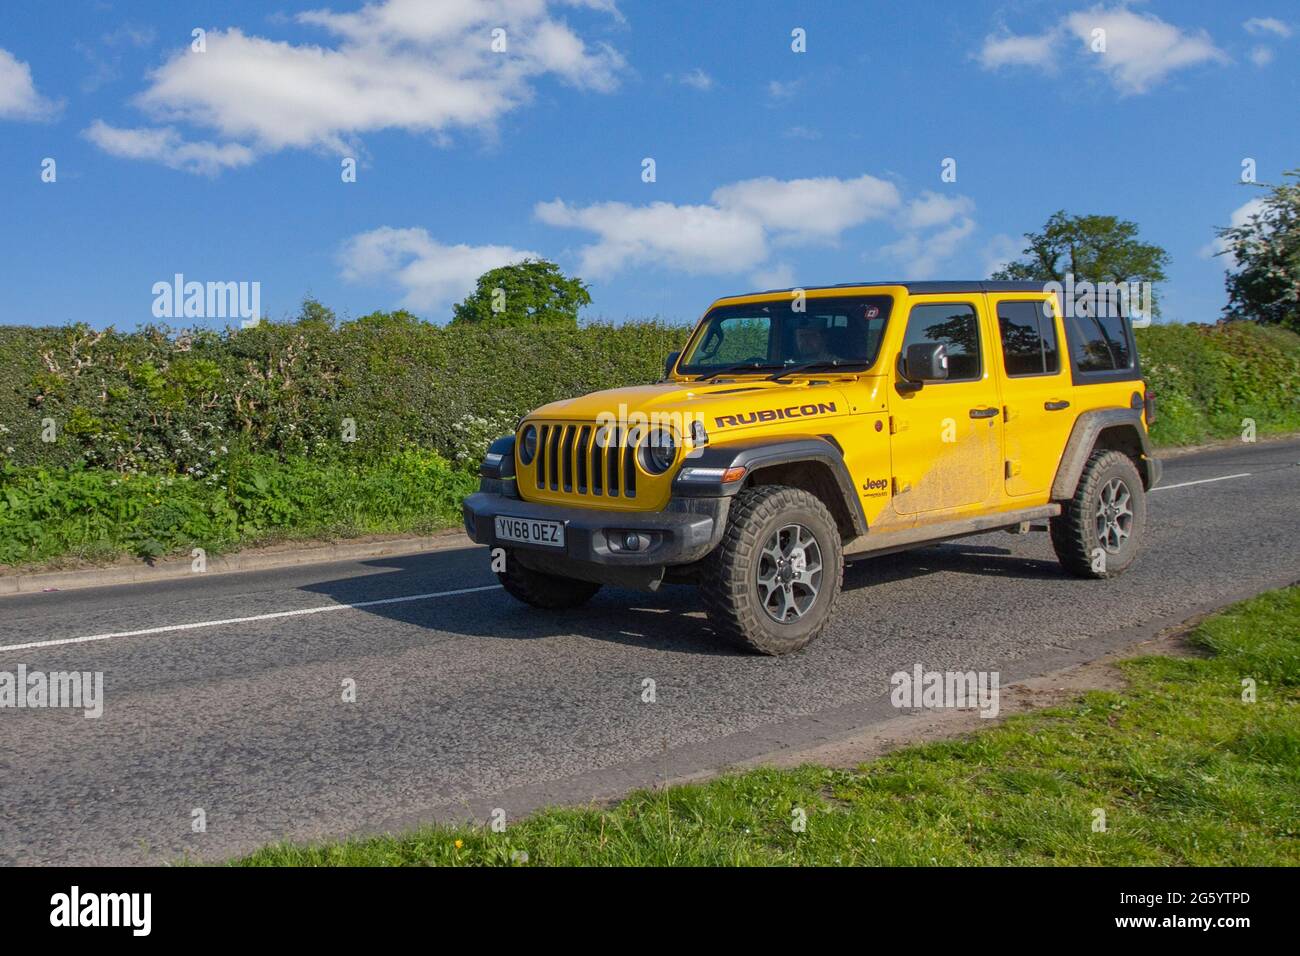 2019 yellow Jeep Wrangler 8 speed automatic 2143 cc diesel truck, en-route  to Capesthorne Hall classic May car show, Cheshire, UK Stock Photo - Alamy